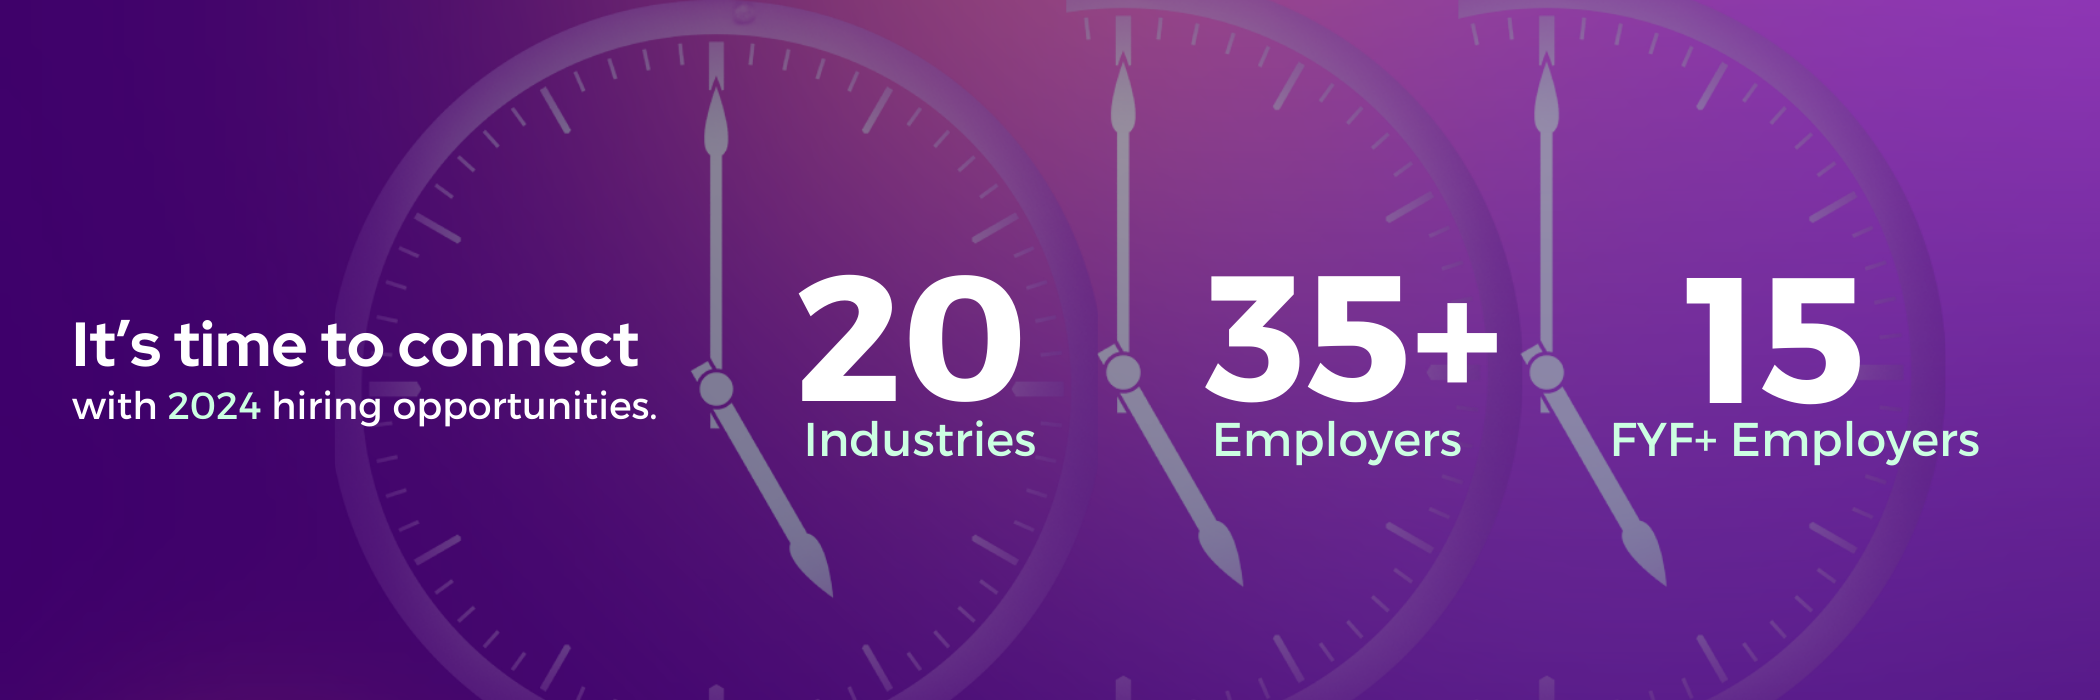 The data visualization highlights 3 numbers: 20 industries, 35+ employers, and 15 F.Y.F.+ employers.